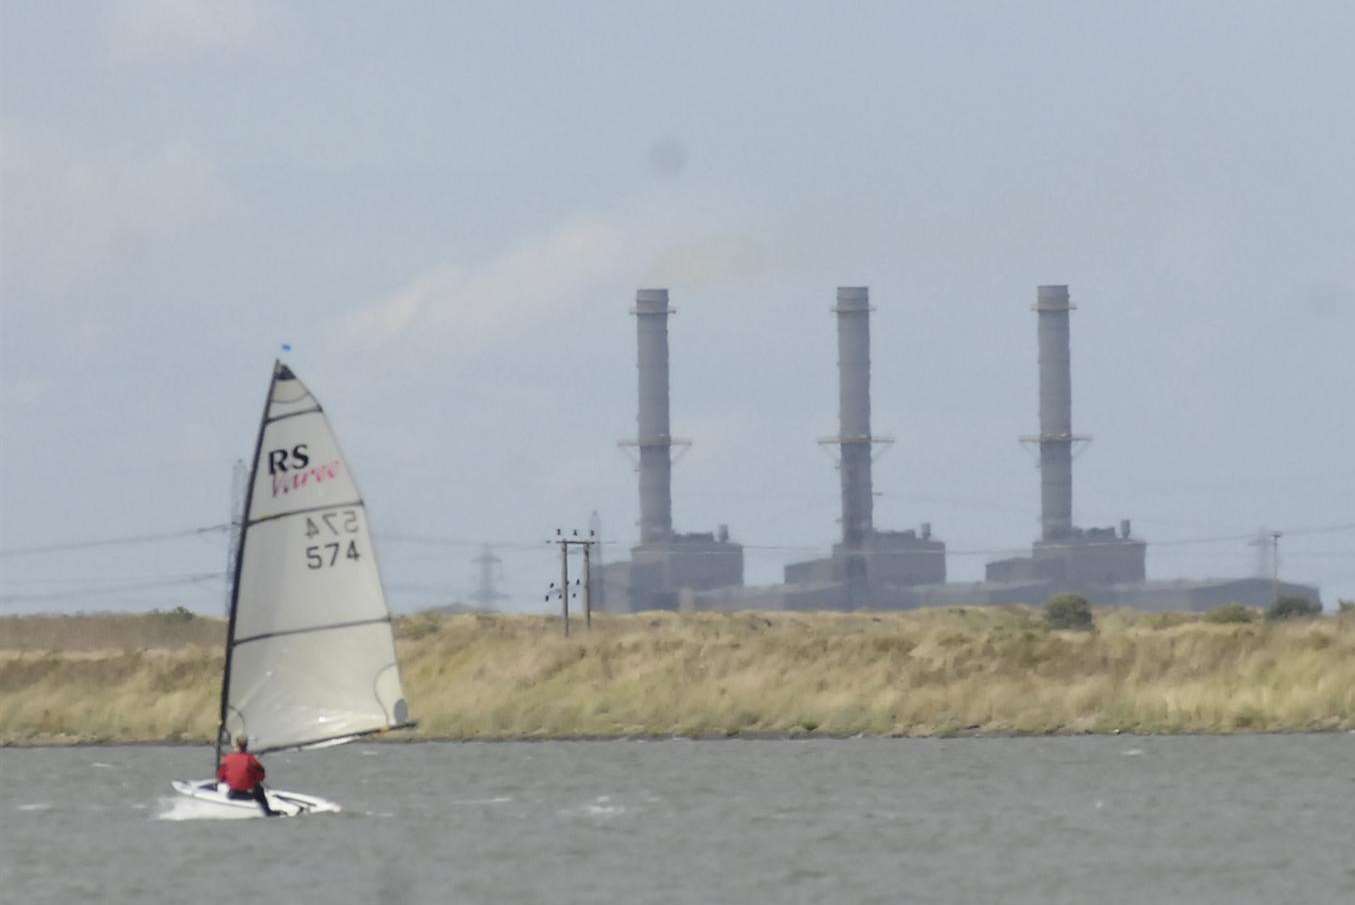 Isle of Sheppey Round-the-Island race 2013